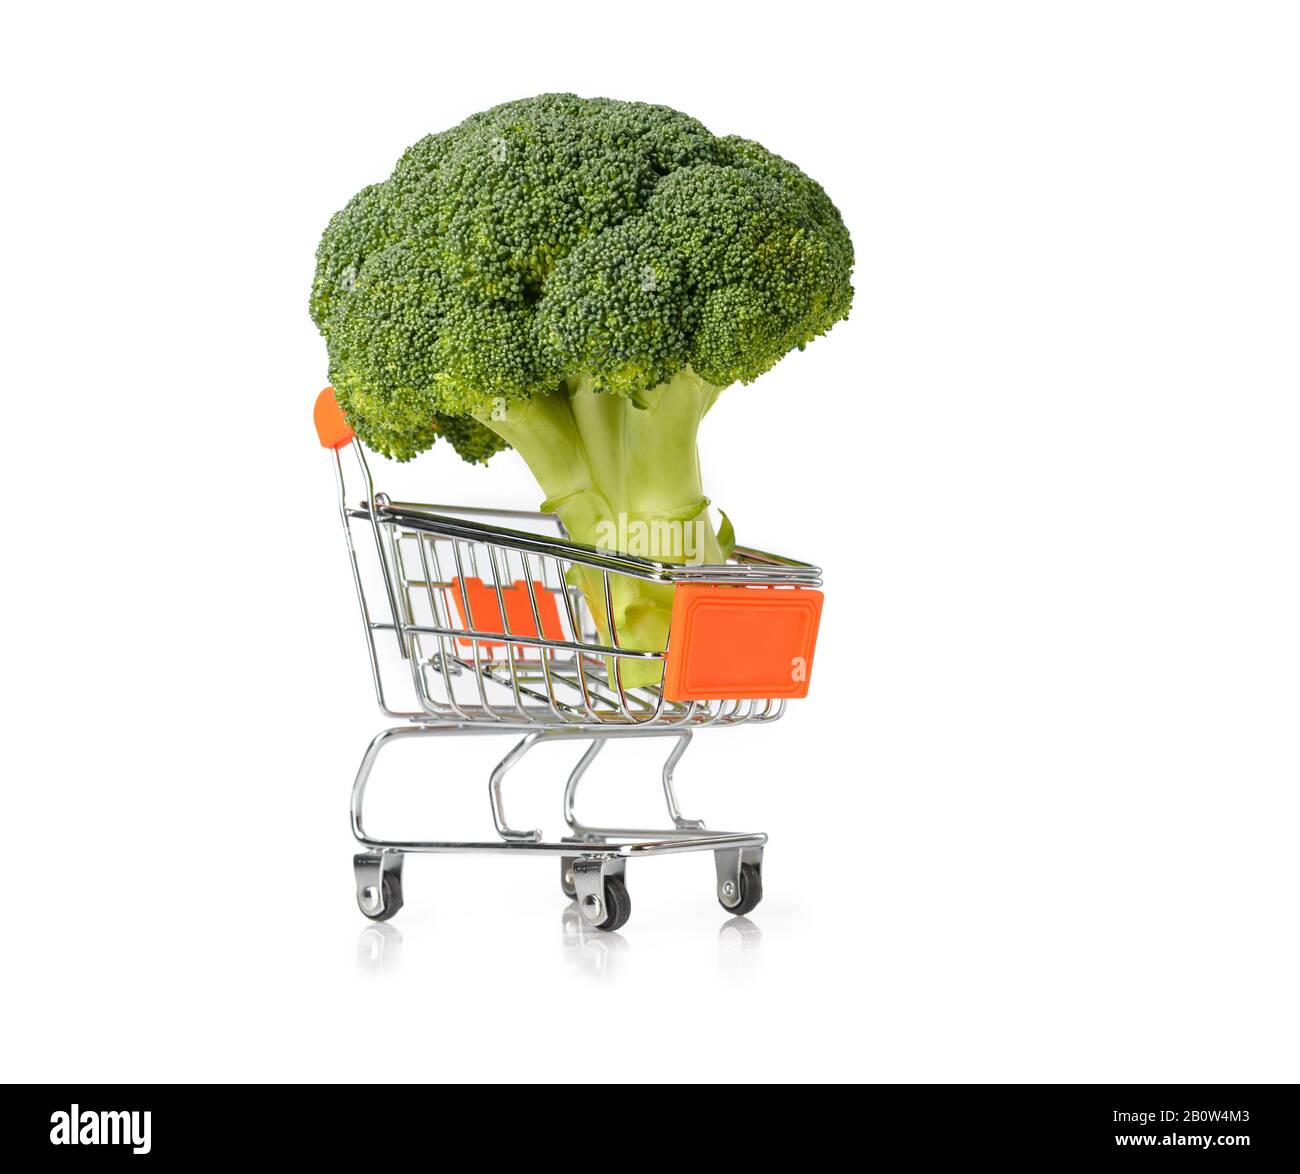 Fresh broccoli. Broccoli in the grocery cart. Shopping cart isolated on white bacnground. Брокколи. Broccoli isolated on white background. Copy space Stock Photo